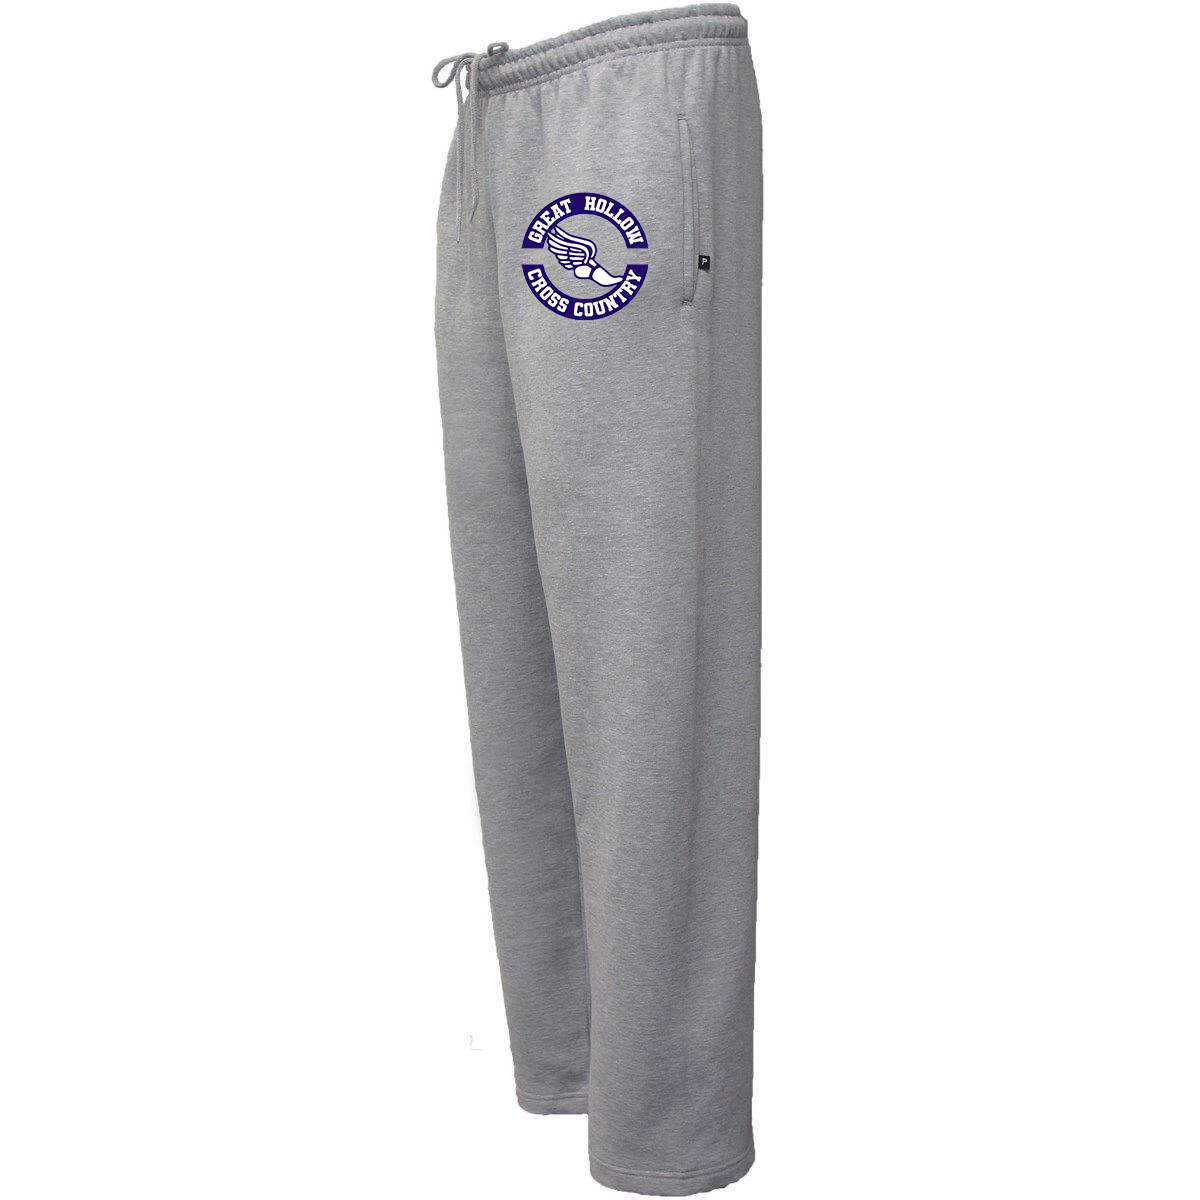 Great Hollow Cross Country Sweatpants